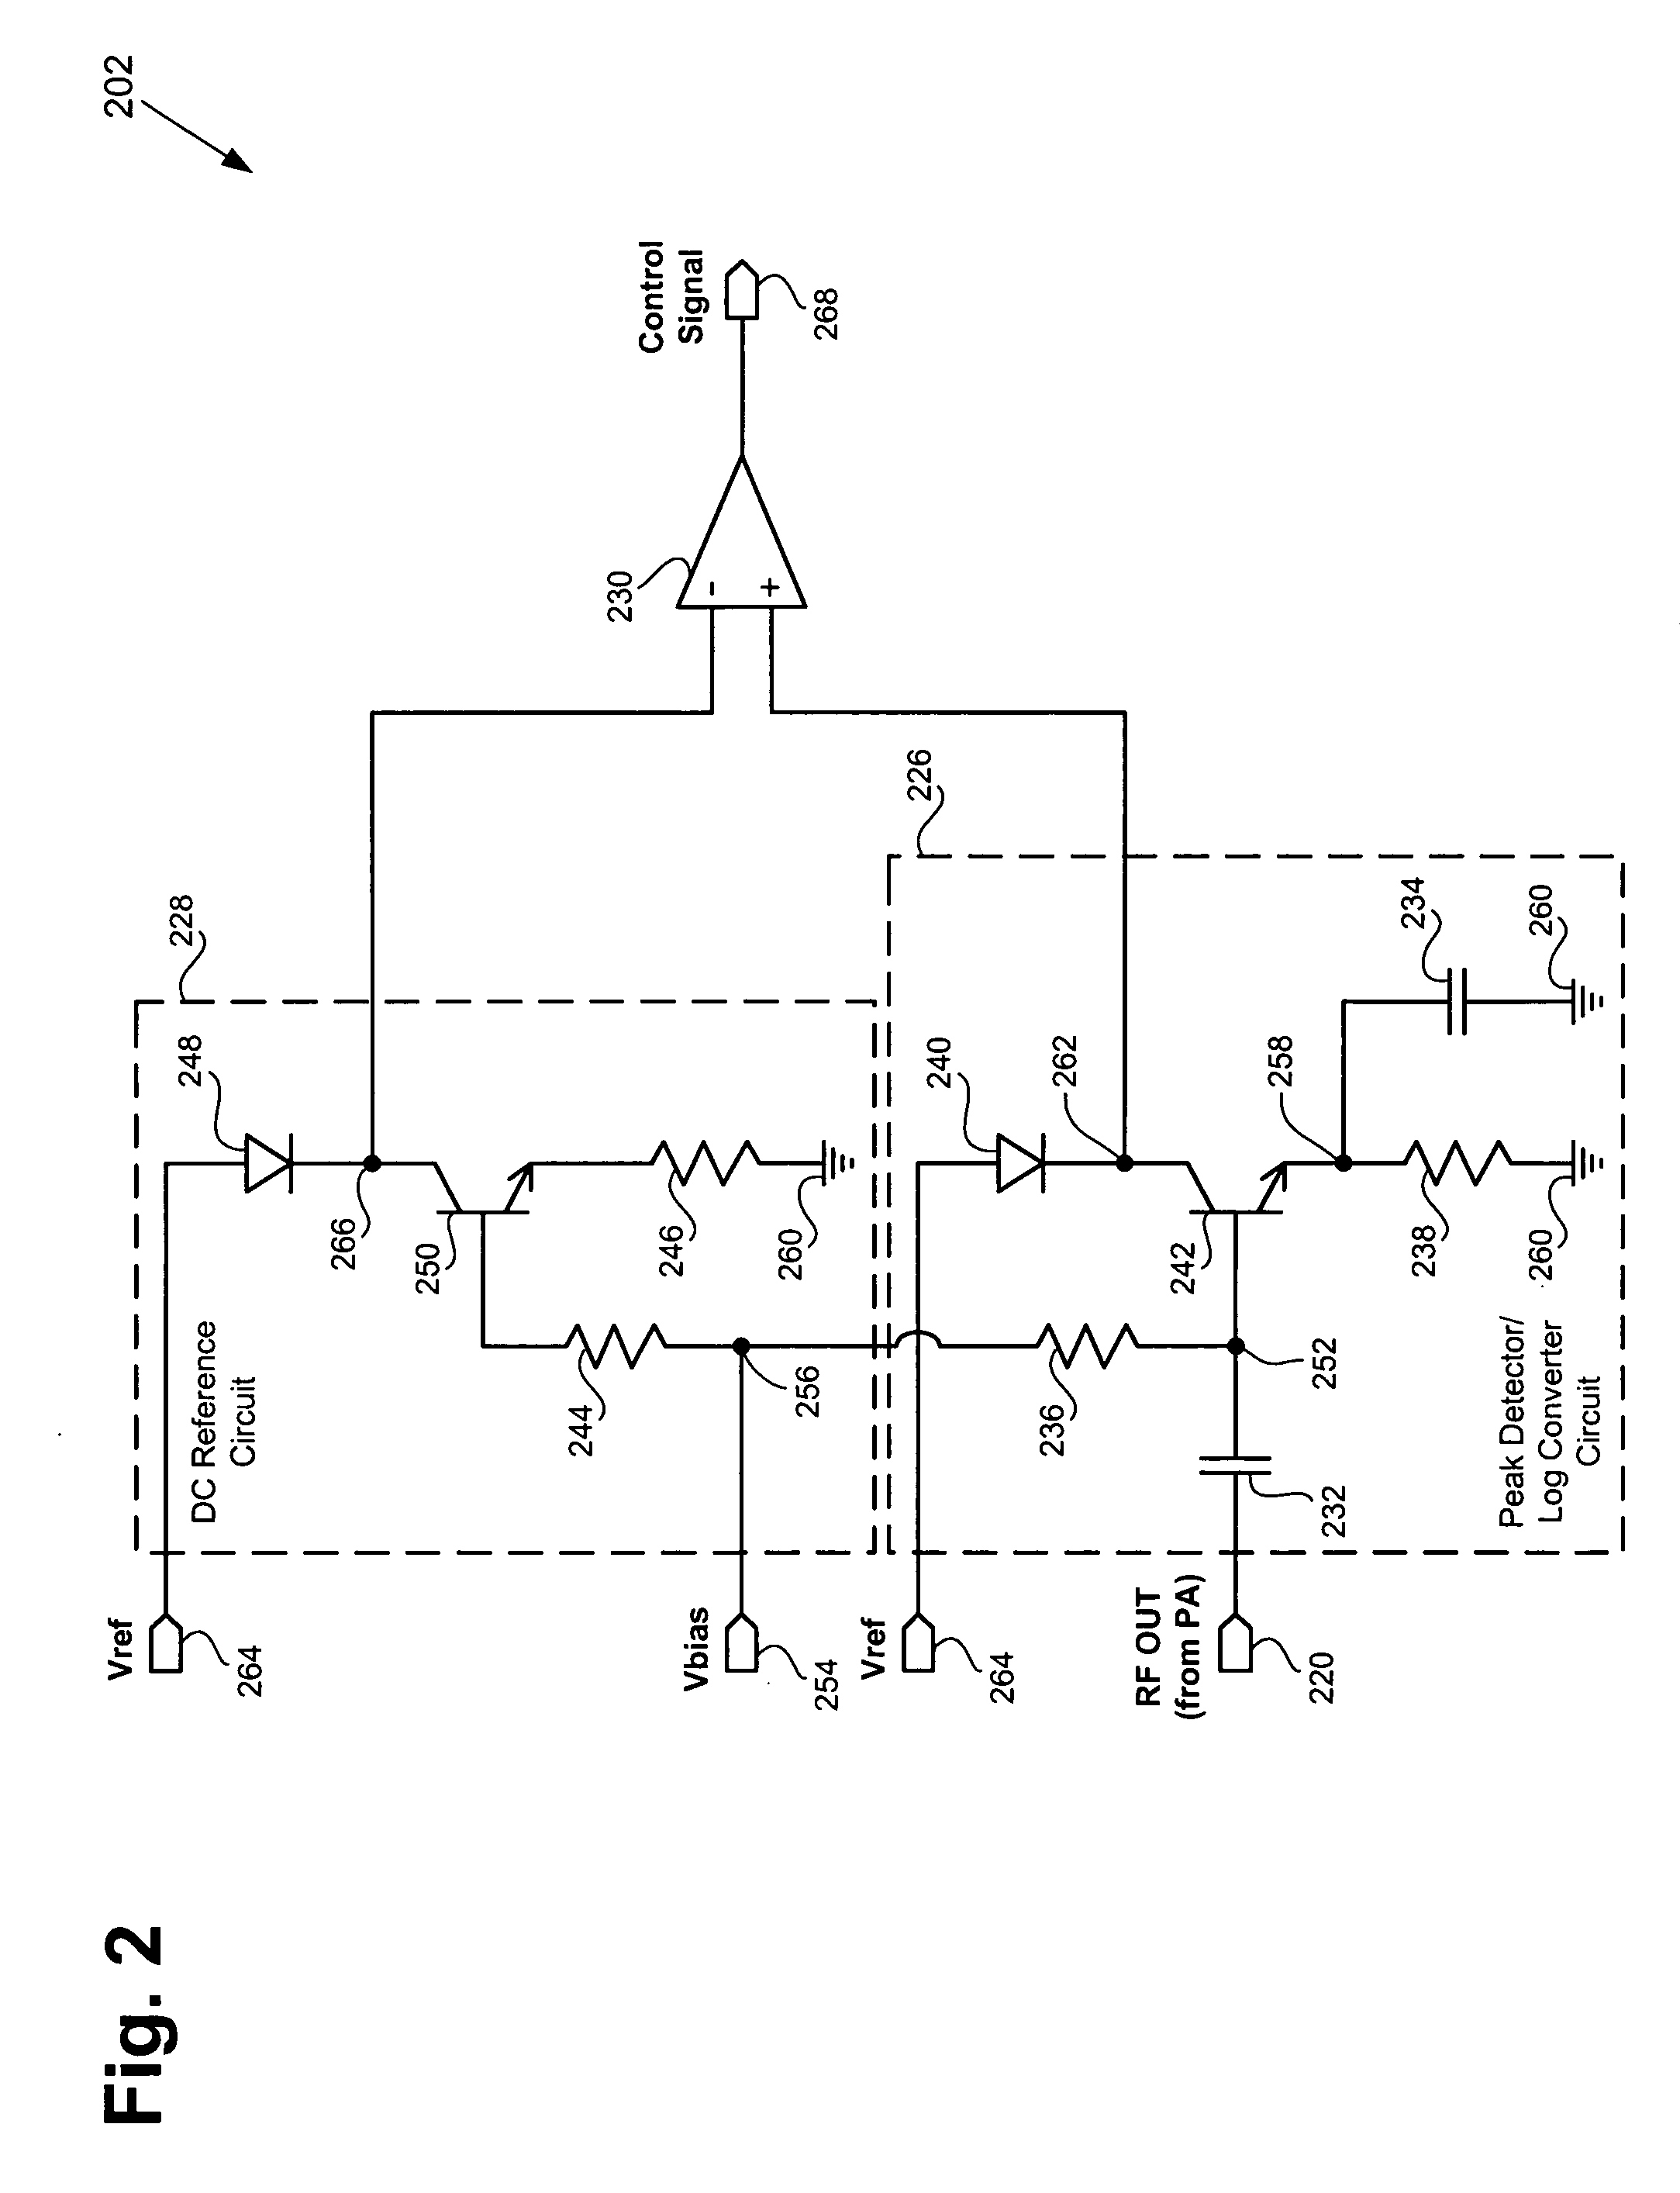 Automatic bias control circuit for linear power amplifiers